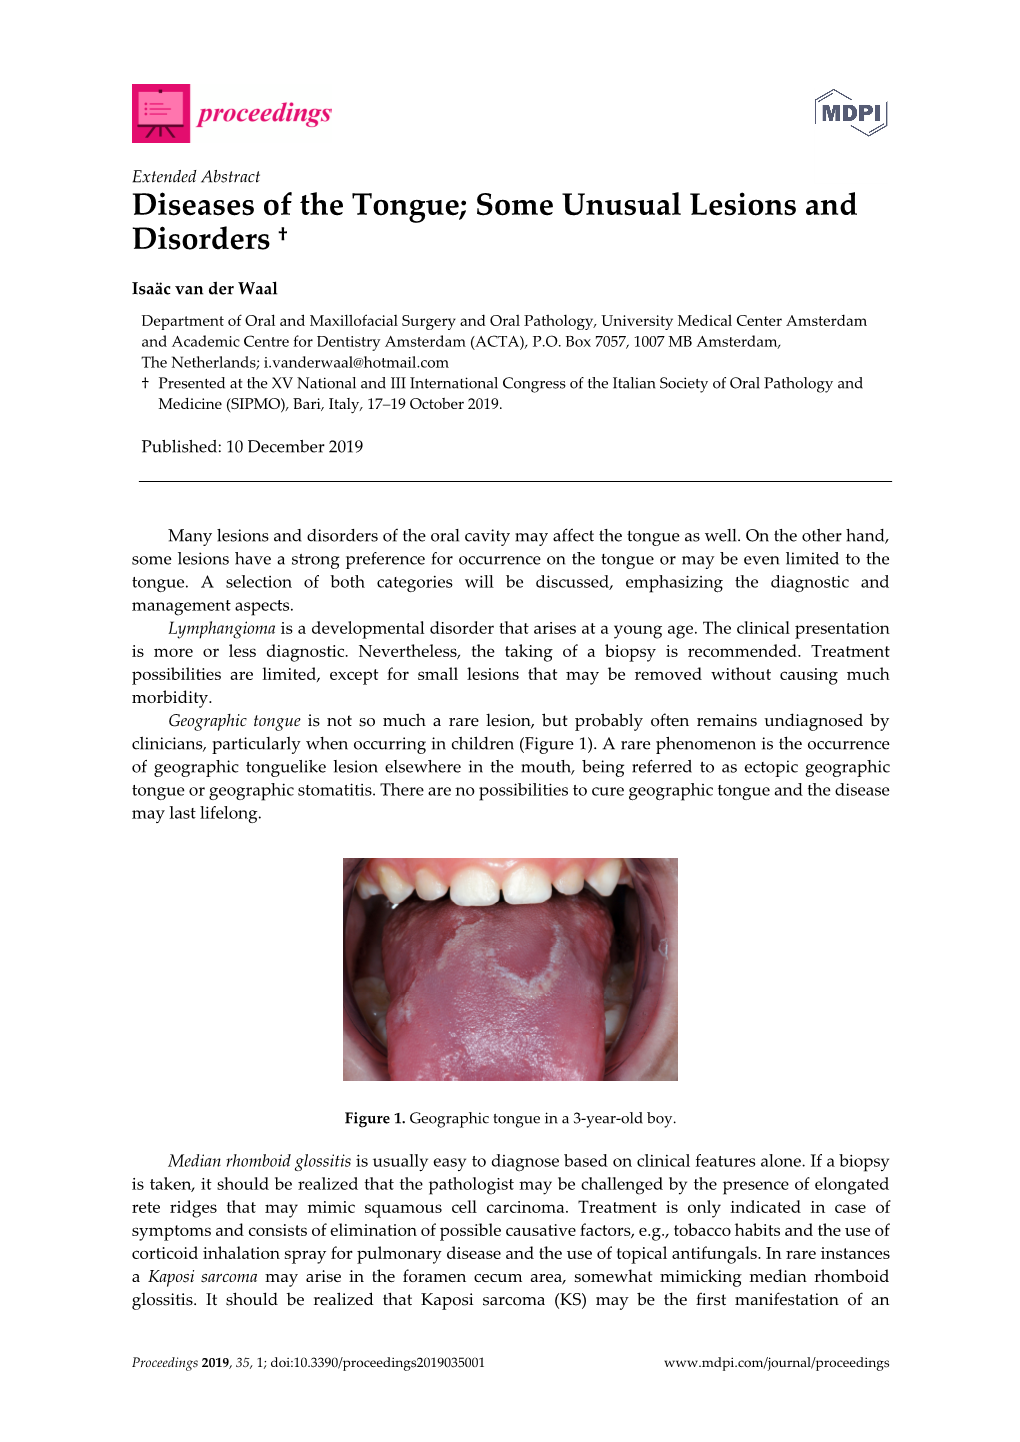 Diseases of the Tongue; Some Unusual Lesions and Disorders †